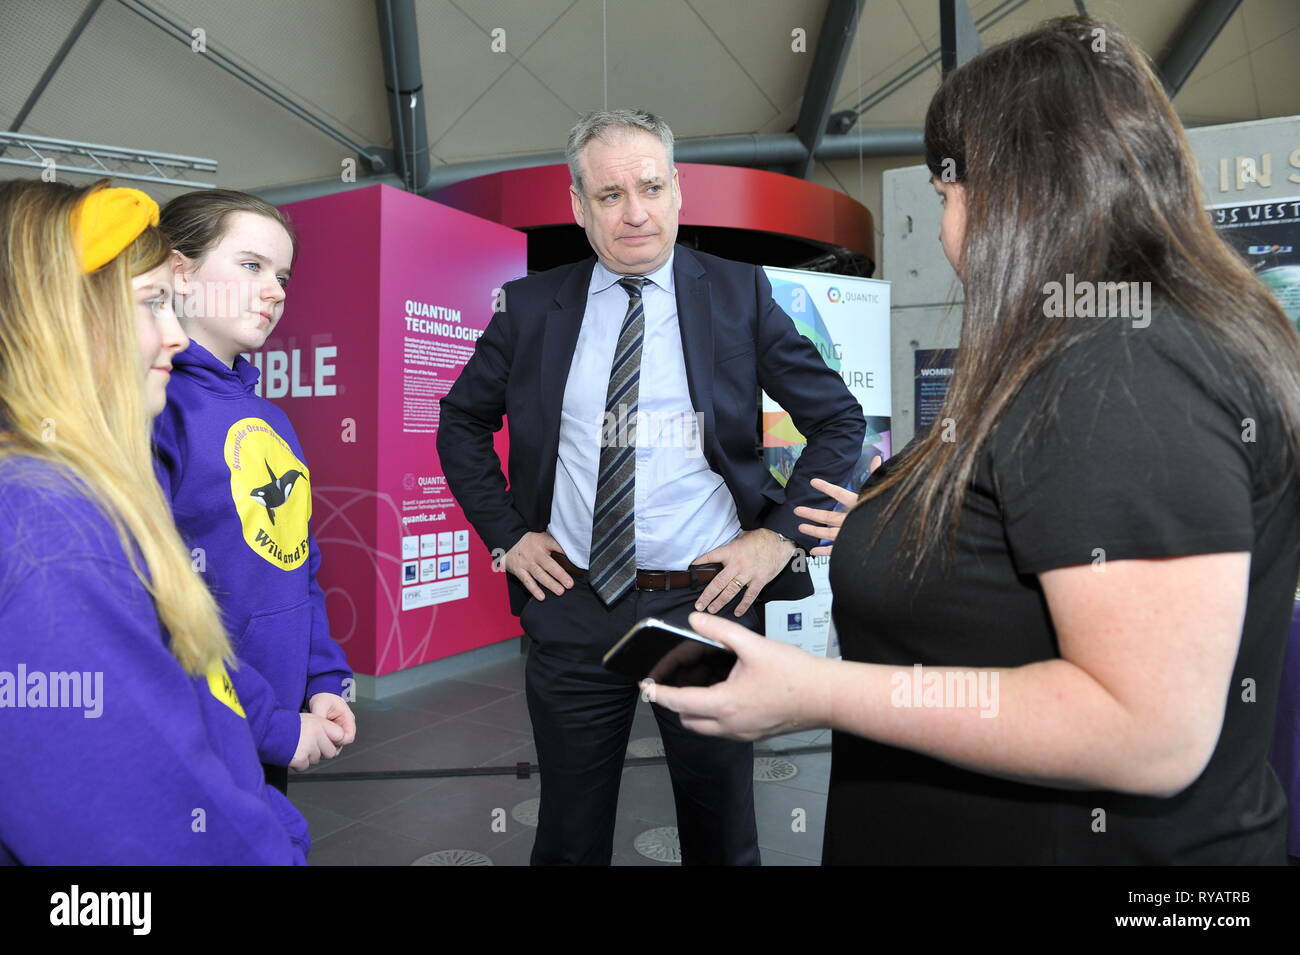 Glasgow, UK. 13 March 2019.  Mr Lochhead will meets P5 and P6 pupils from Sunnyside Primary School showcasing an environmental campaign they have created, as well as viewing exhibits from companies from across the Science, Technology, Engineering and Mathematics (STEM) industry.  Funding for Scotland’s four science centres will be announced during British Science Week.  Scotland is the only part of the UK where science centres are supported through annual funding. Minister for Science Richard Lochhead will unveils more funding. Stock Photo